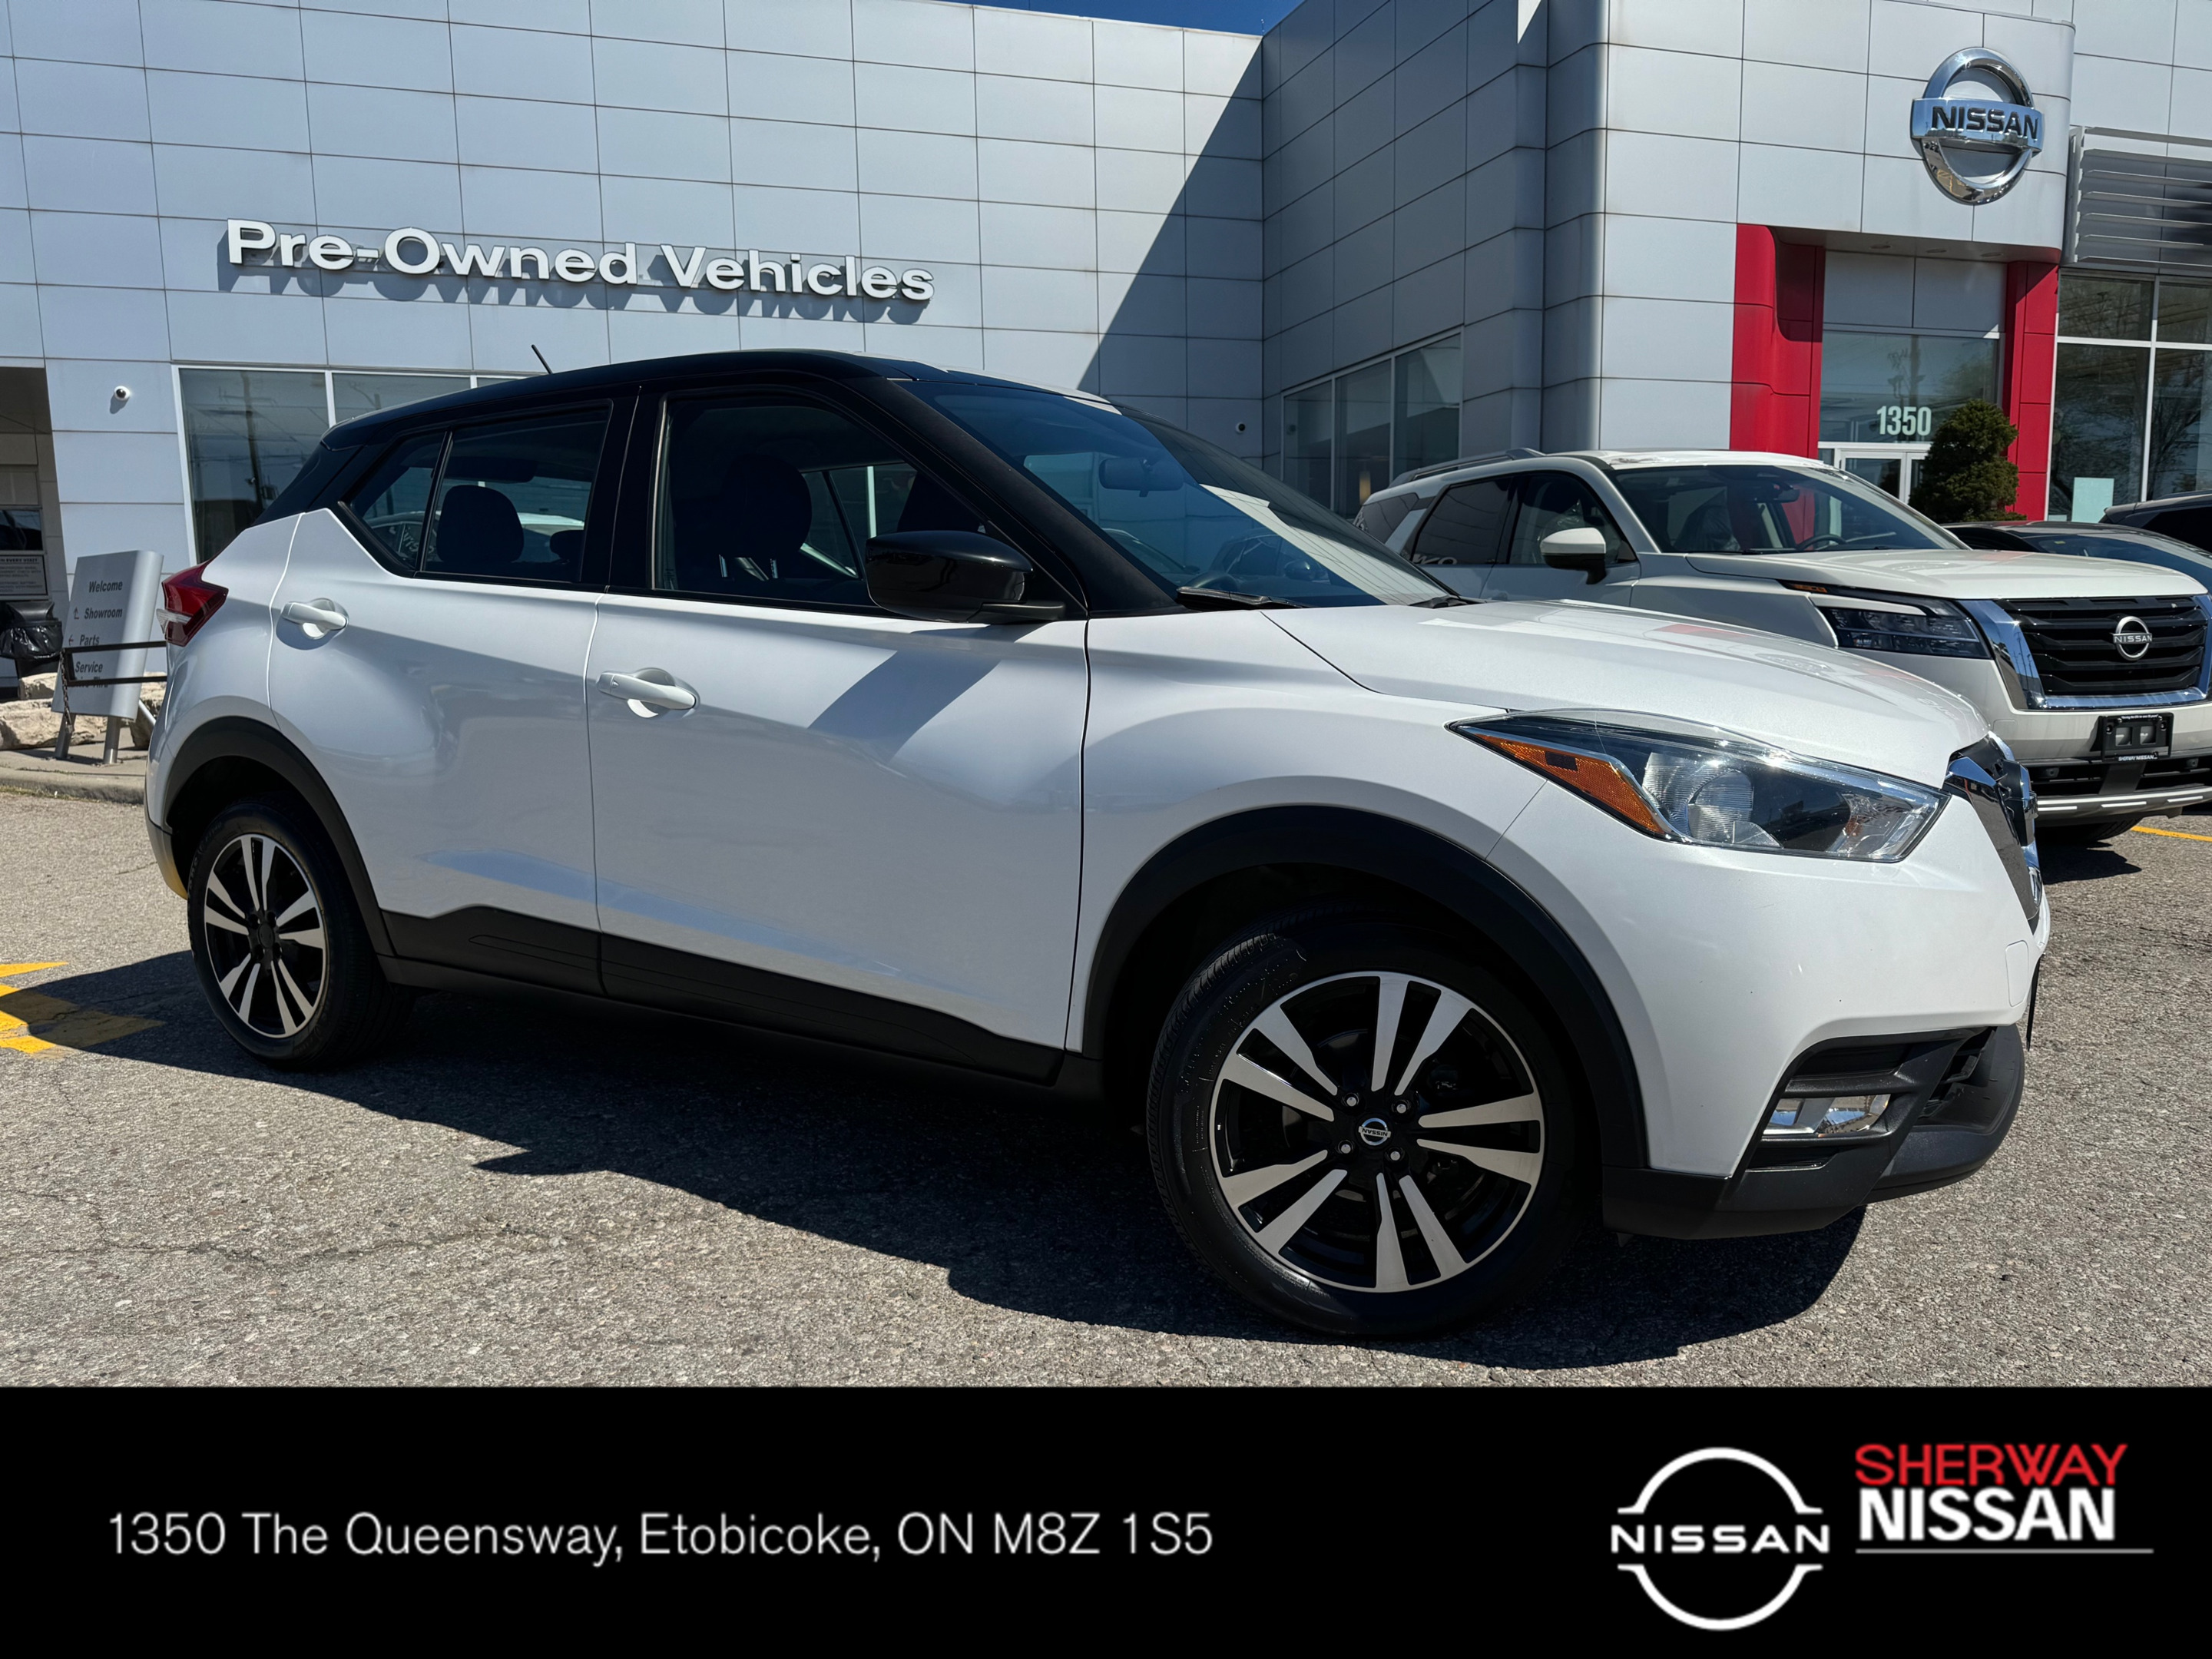 2019 Nissan Kicks ONE OWNER WELL MAINTAINED TRADE. WINDOWS,LOCKS,AIR